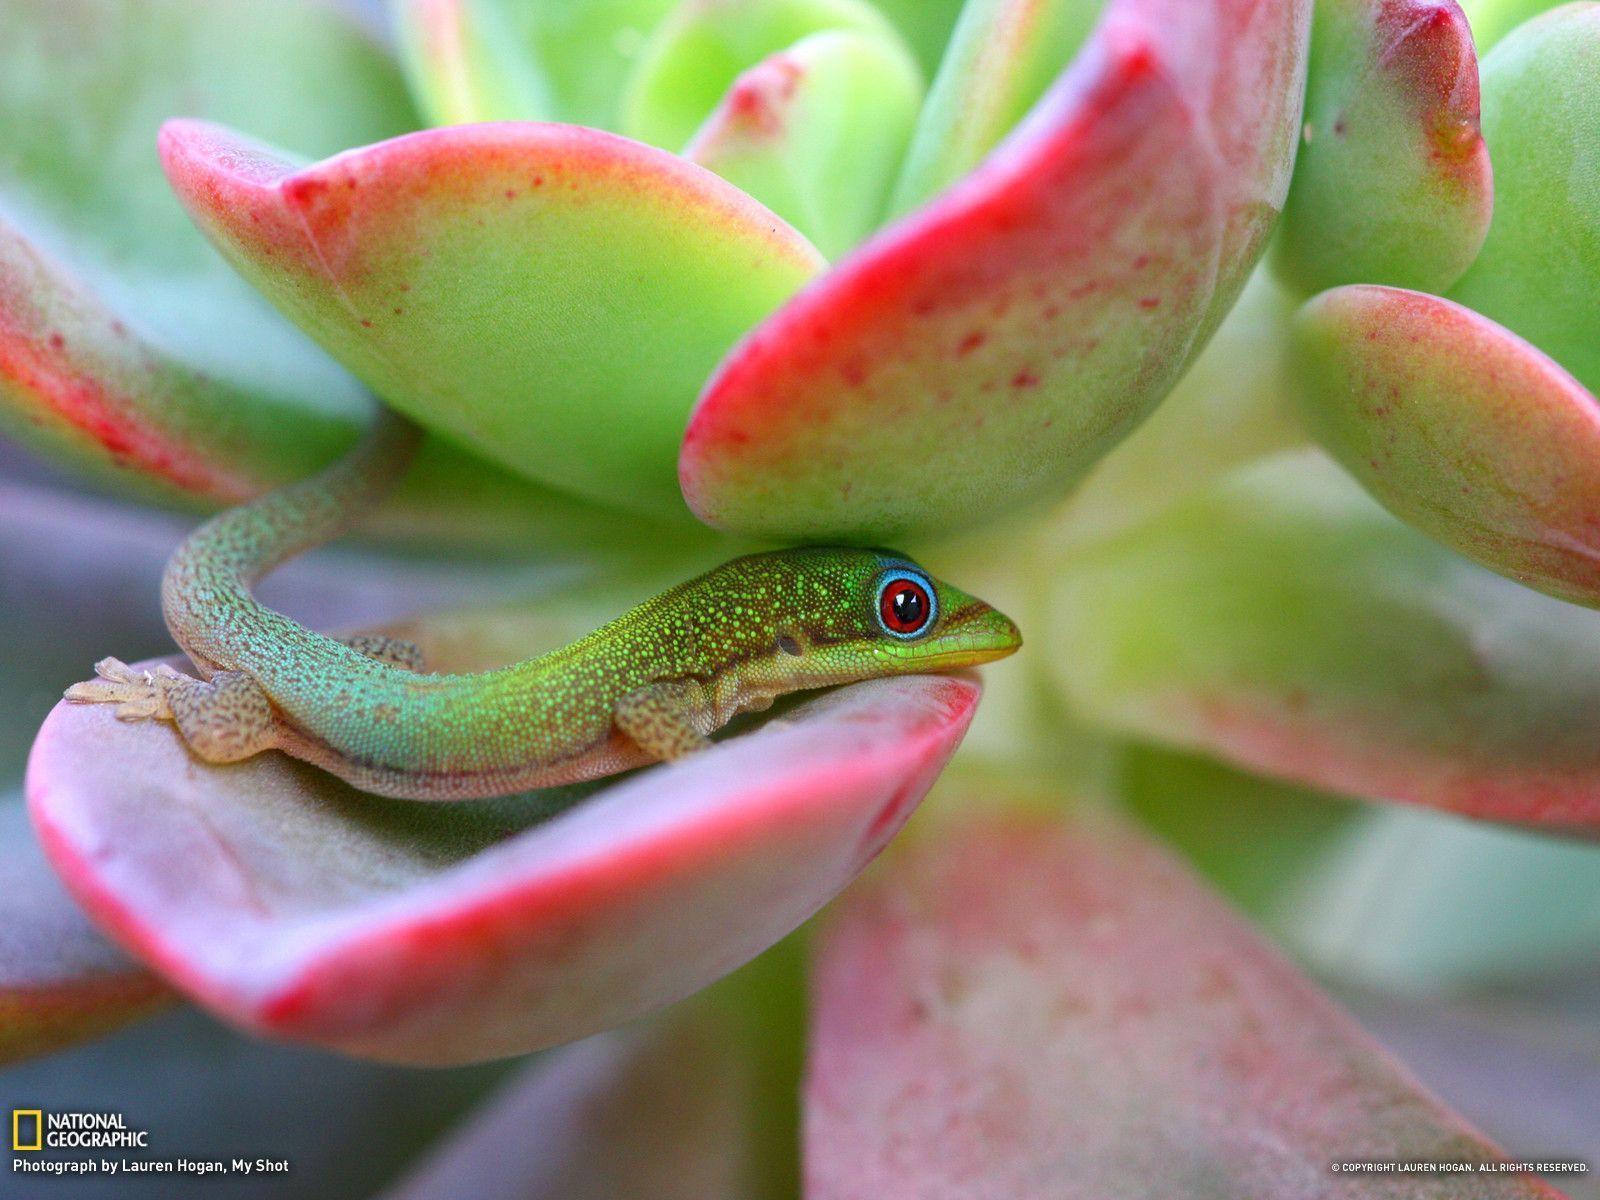 Gecko Picture - Maui Wallpaper - National Geographic Photo